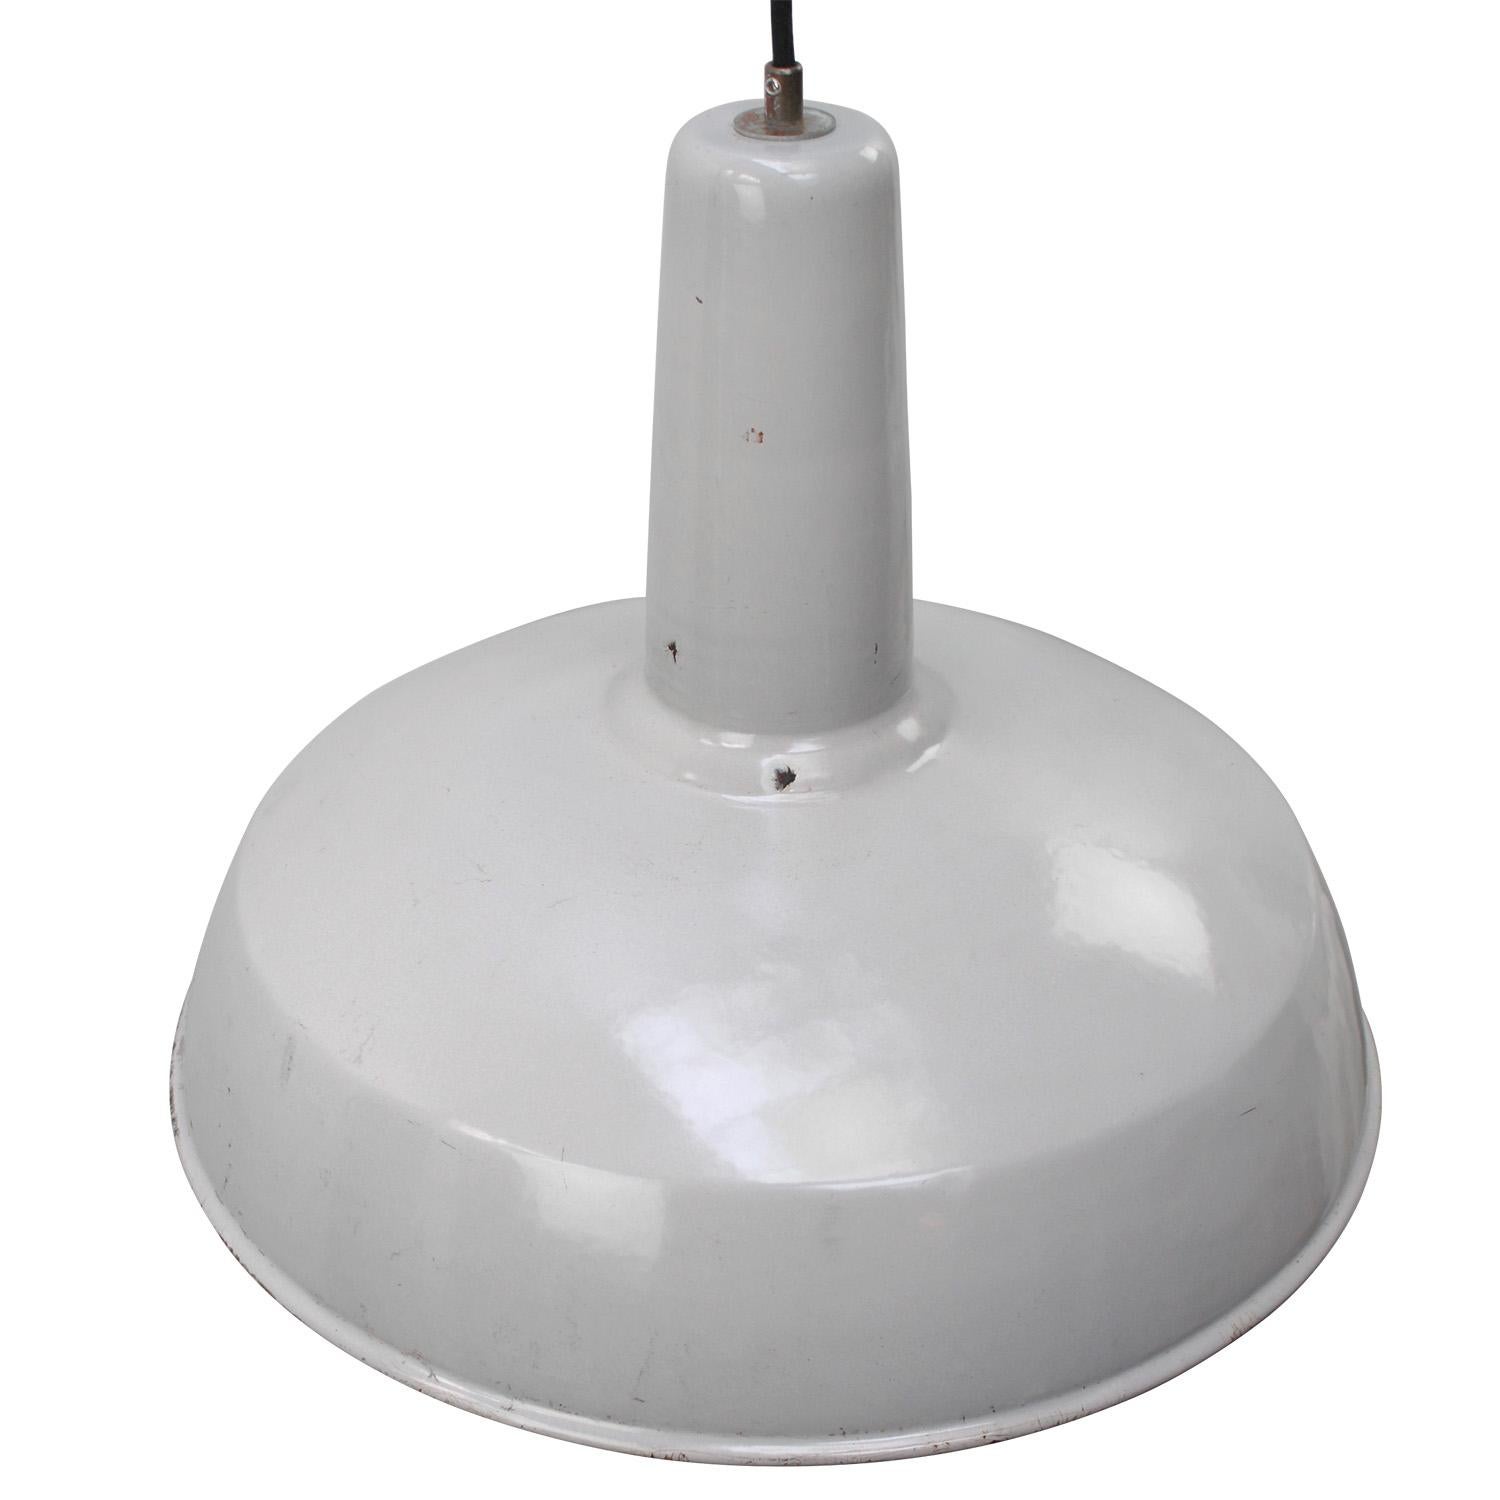 Industrial hanging lamp made by Philips, Holland
gray enamel white interior

Weight: 1.90 kg / 4.2 lb

Priced per individual item. All lamps have been made suitable by international standards for incandescent light bulbs, energy-efficient and LED